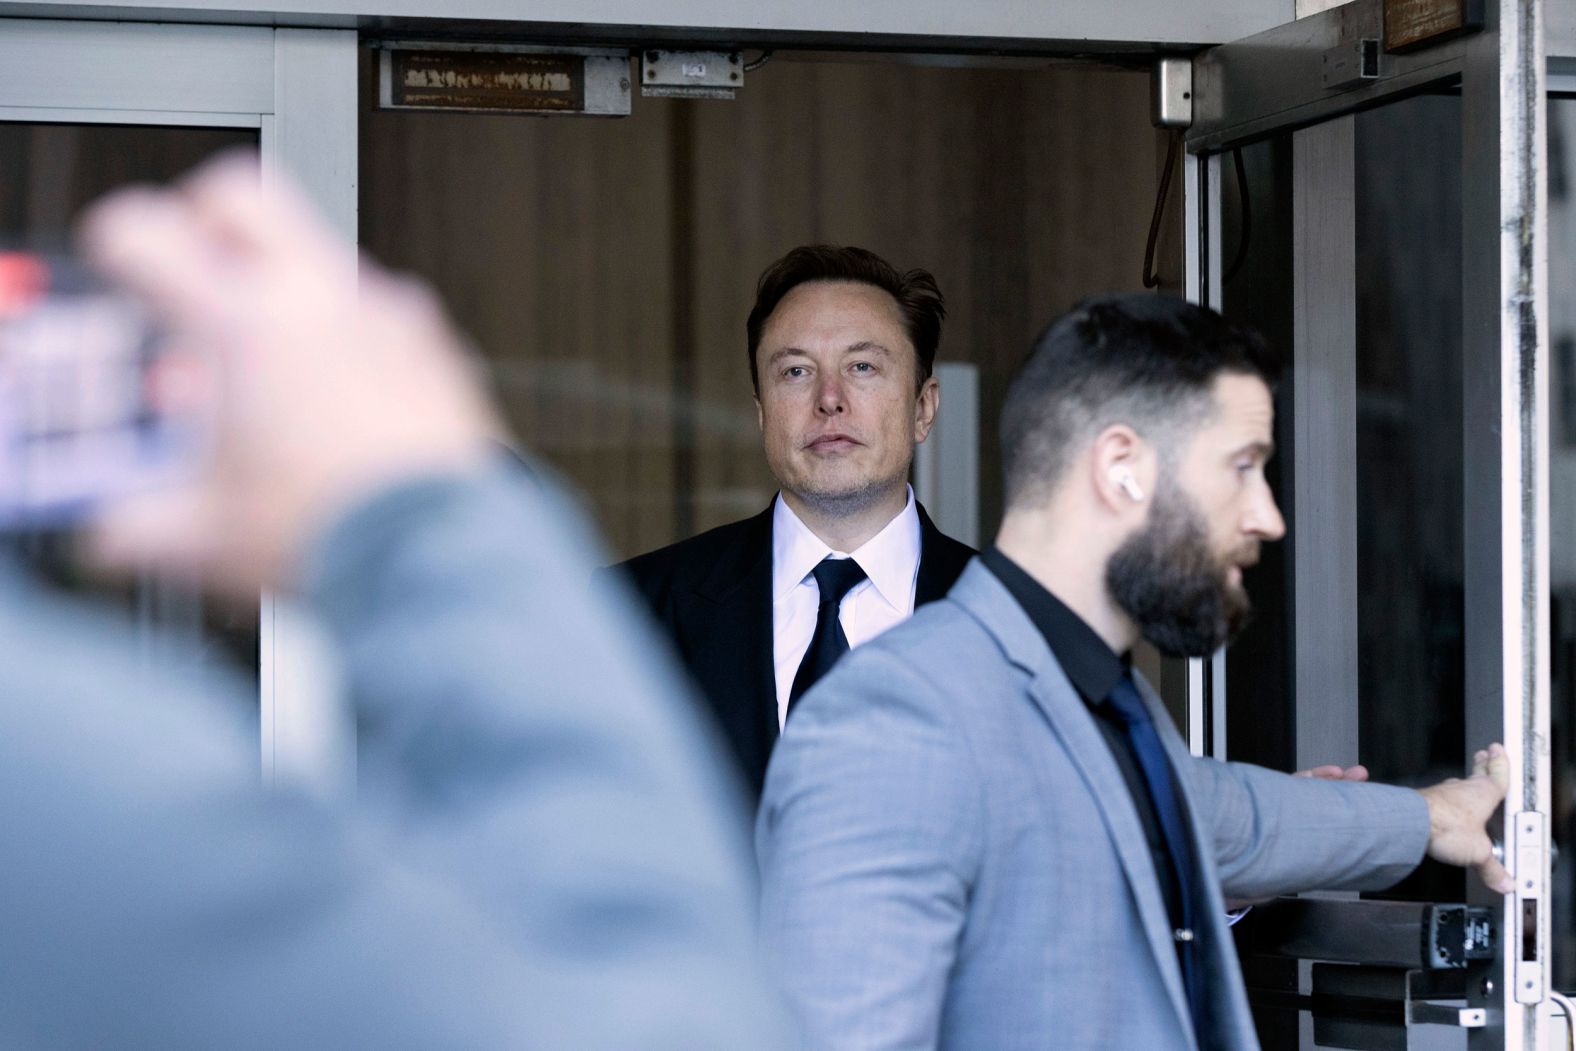 Tesla CEO Elon Musk leaves a federal courthouse in San Francisco on Tuesday, January 24. Musk, Tesla and company directors <a href="https://www.cnn.com/2023/01/23/business/tesla-trial-funding-secured-elon-musk/index.html" target="_blank">are facing a shareholder lawsuit</a> over a 2018 tweet in which Musk said that he was thinking about taking Tesla private for $420 a share and had "funding secured." Those two words resulted in the CEO having to forfeit his position as Tesla's executive chairman and pay millions of dollars in fines and legal fees. 